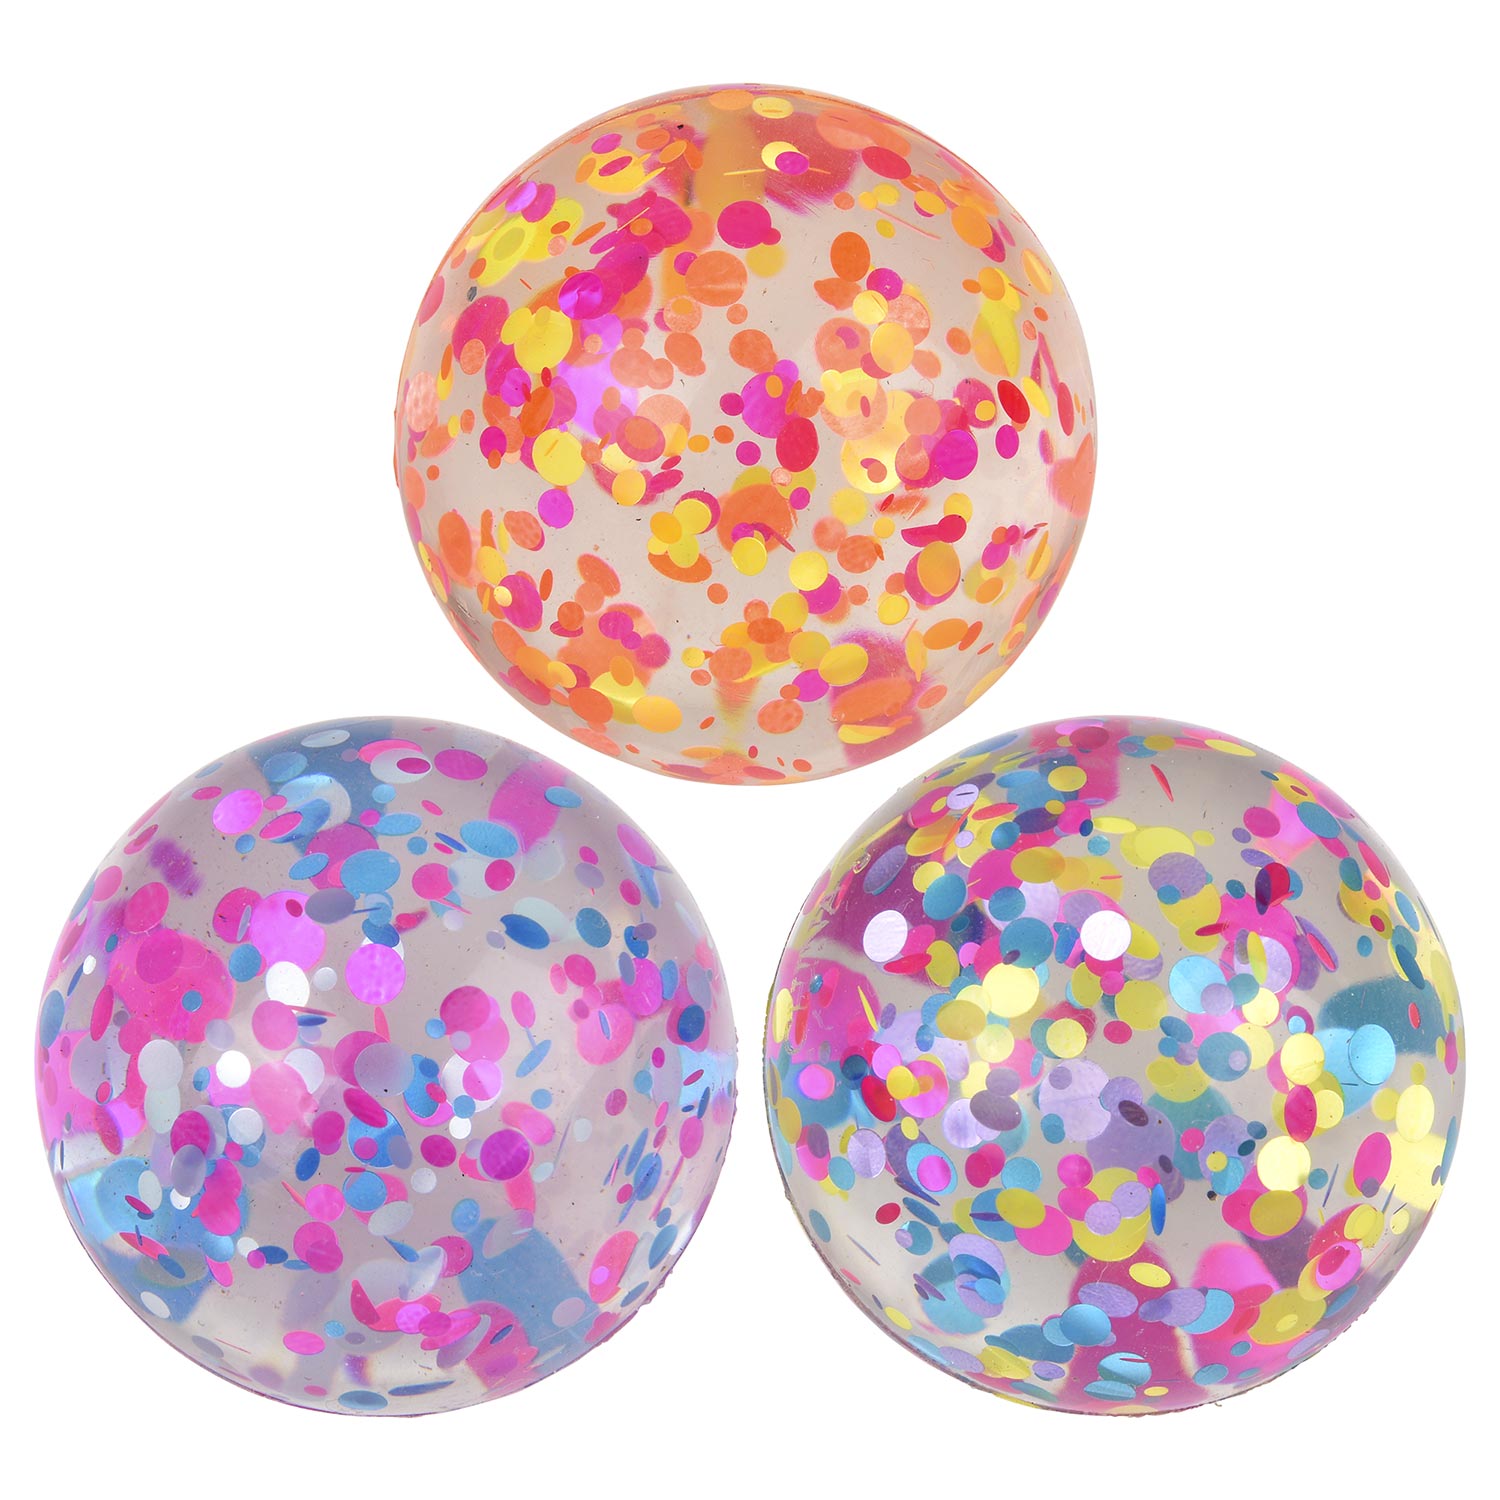 Sparkle Spot Bouncy Balls - 1 3/4 inch (45mm) - 12 Count: Rebecca's ...